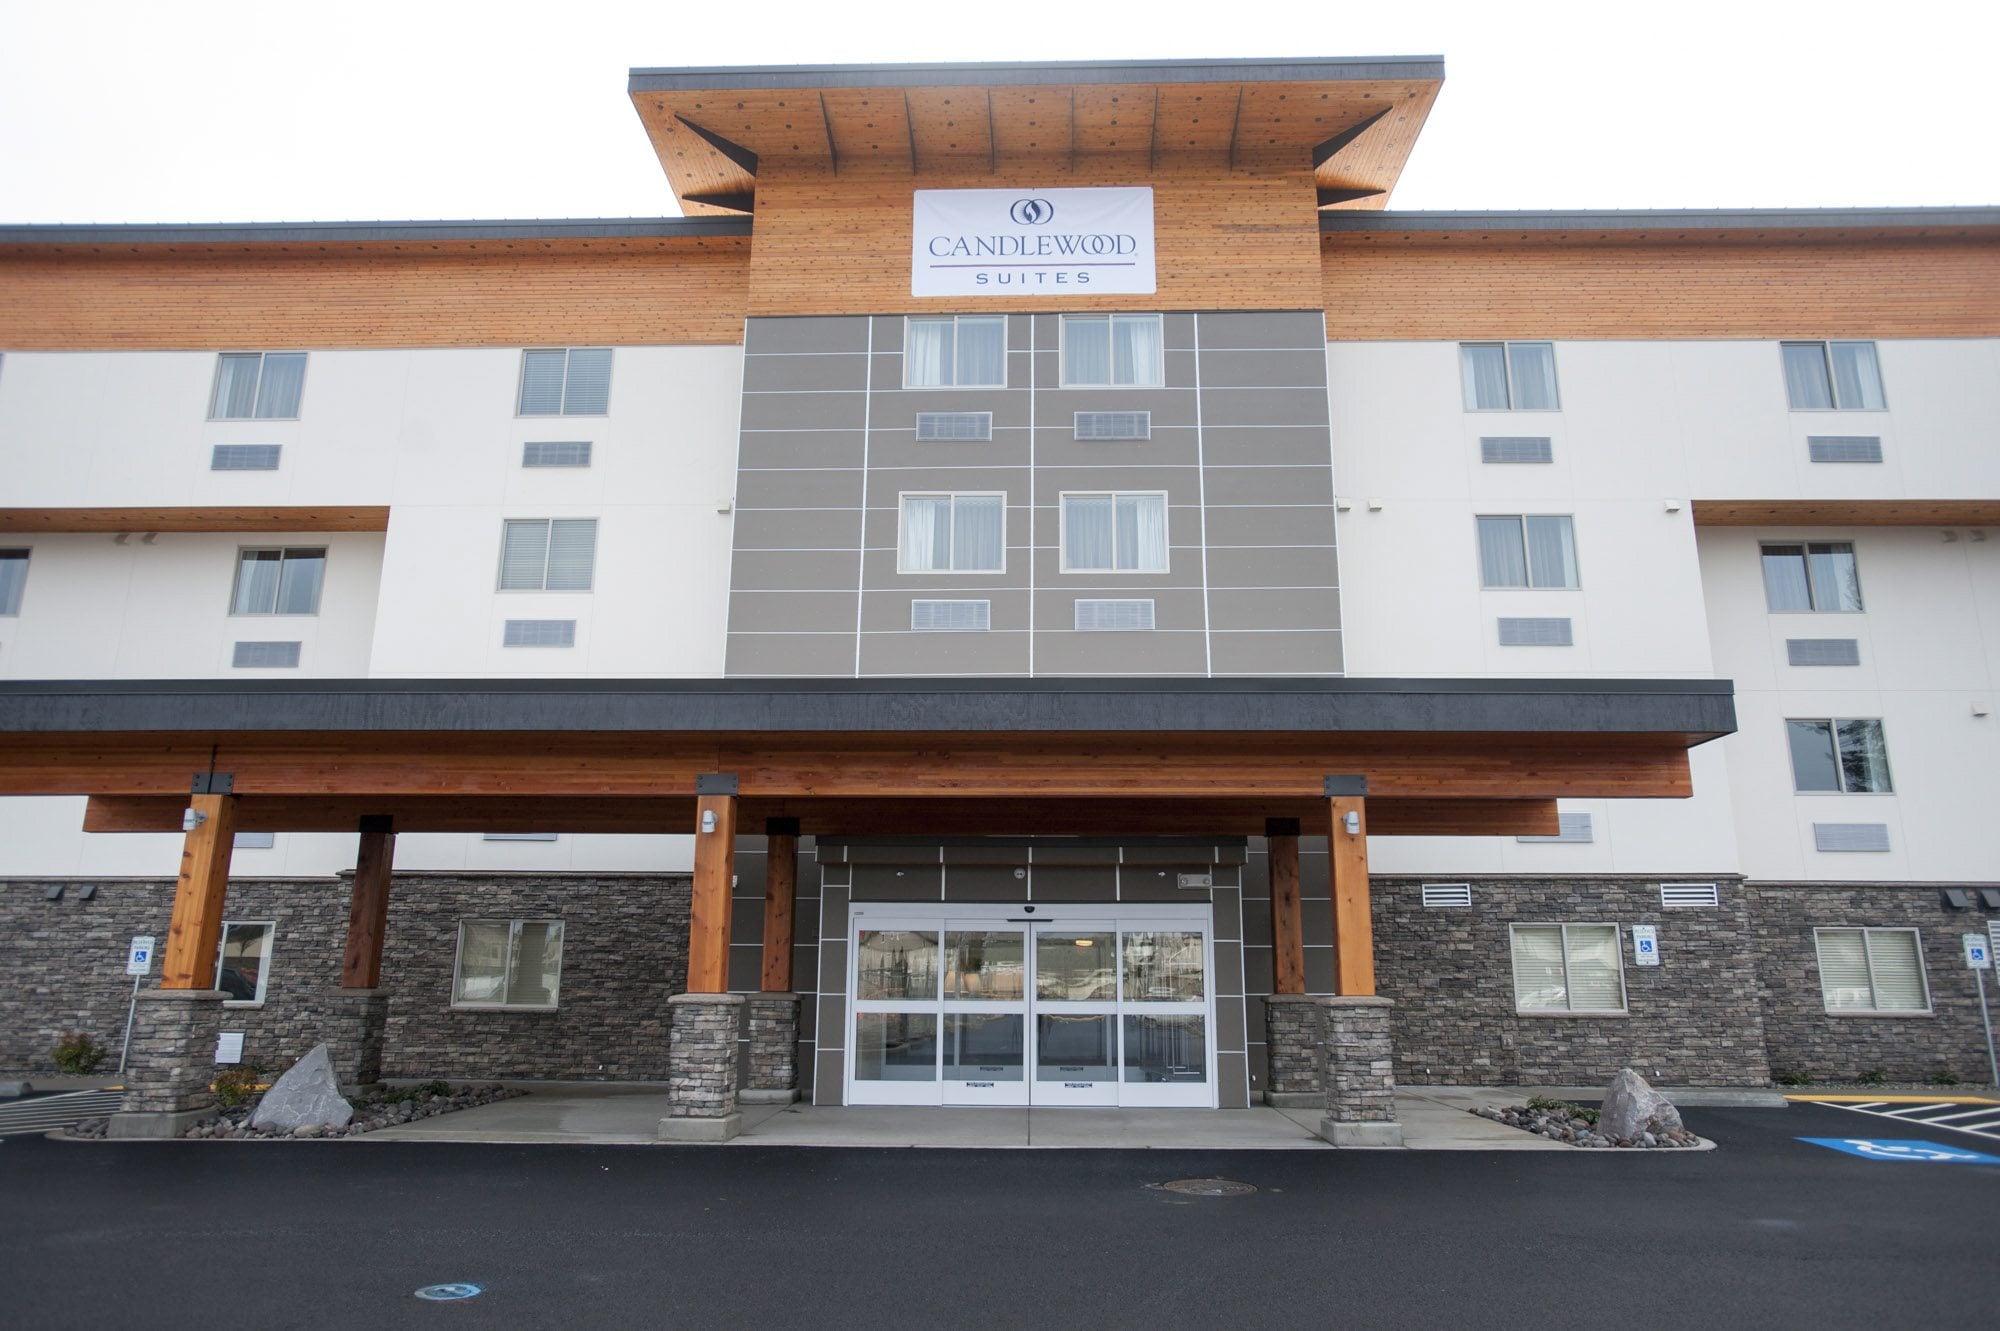 A new hotel, Candlewood suites is seen in East Vancouver Friday January 15, 2016.